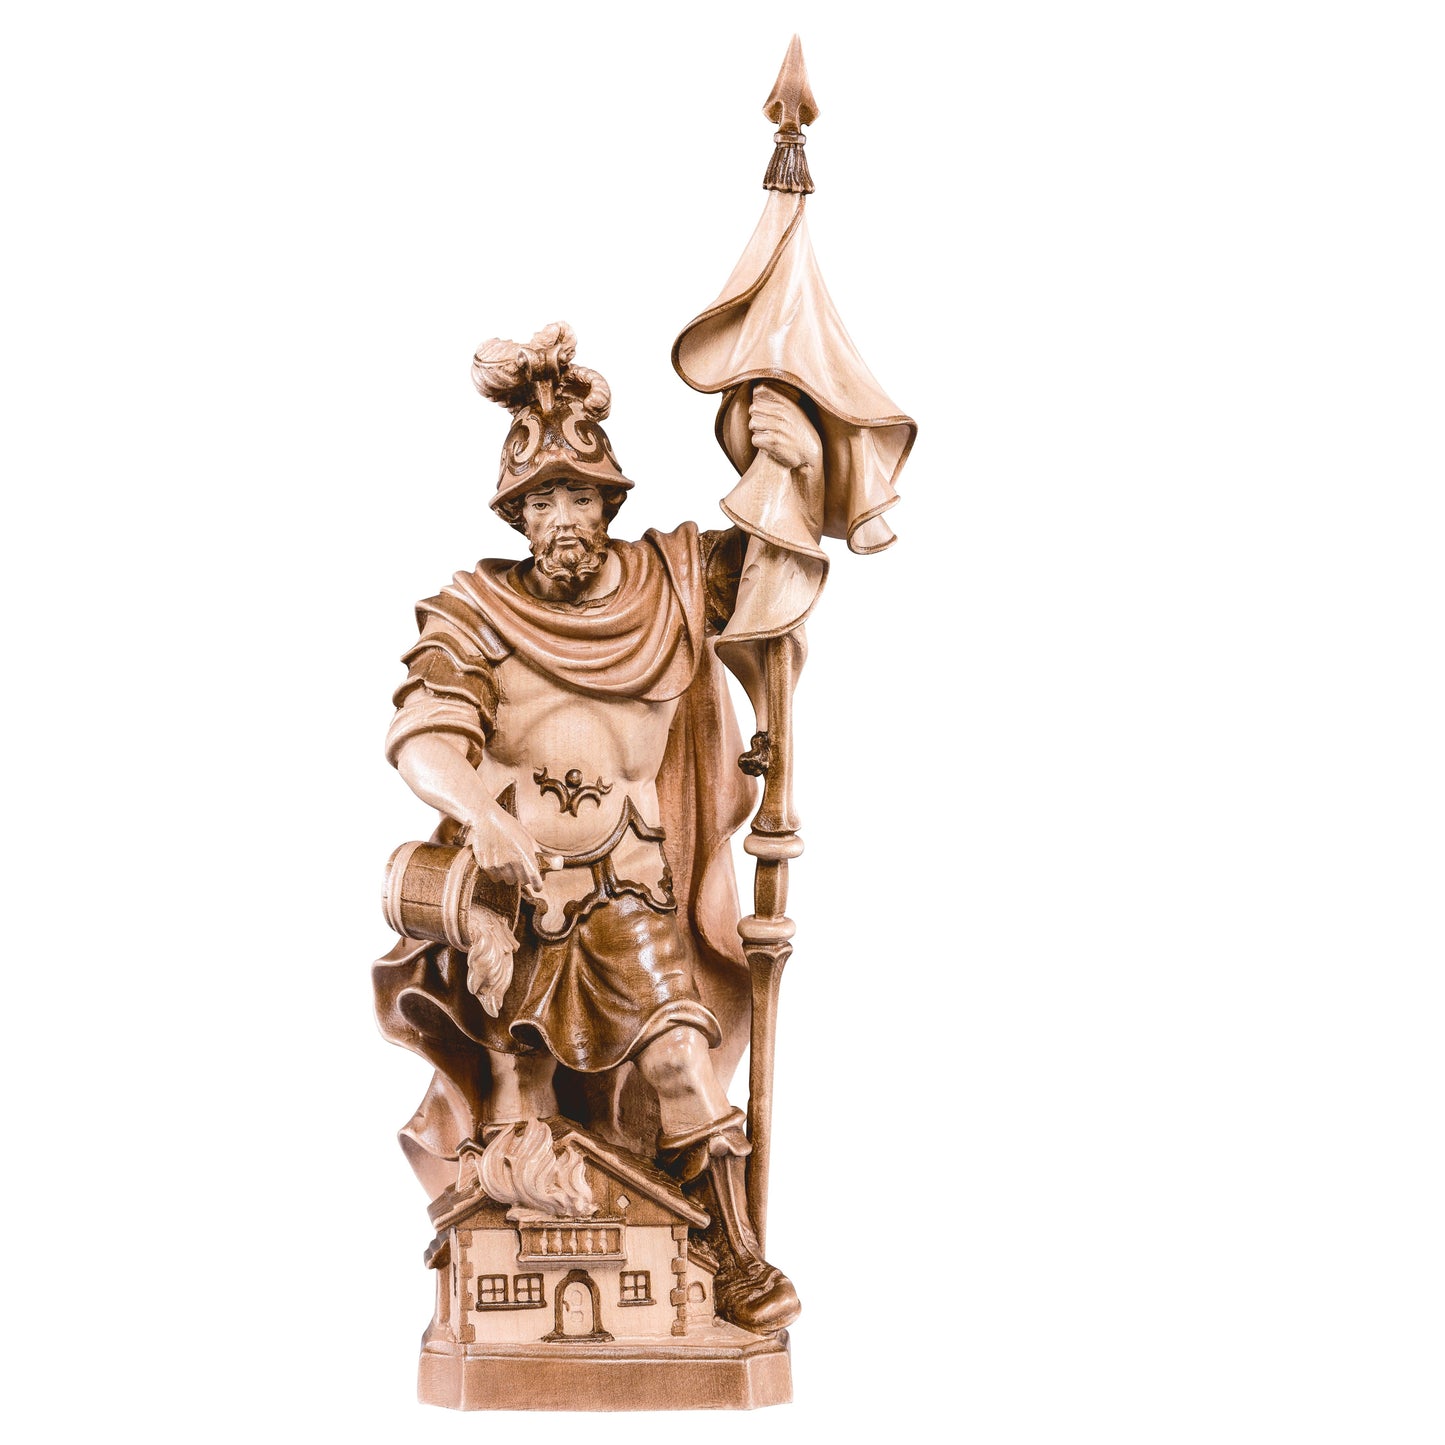 MONDO CATTOLICO Glossy / 16 cm (6.3 in) Wooden Statue of St. Florian